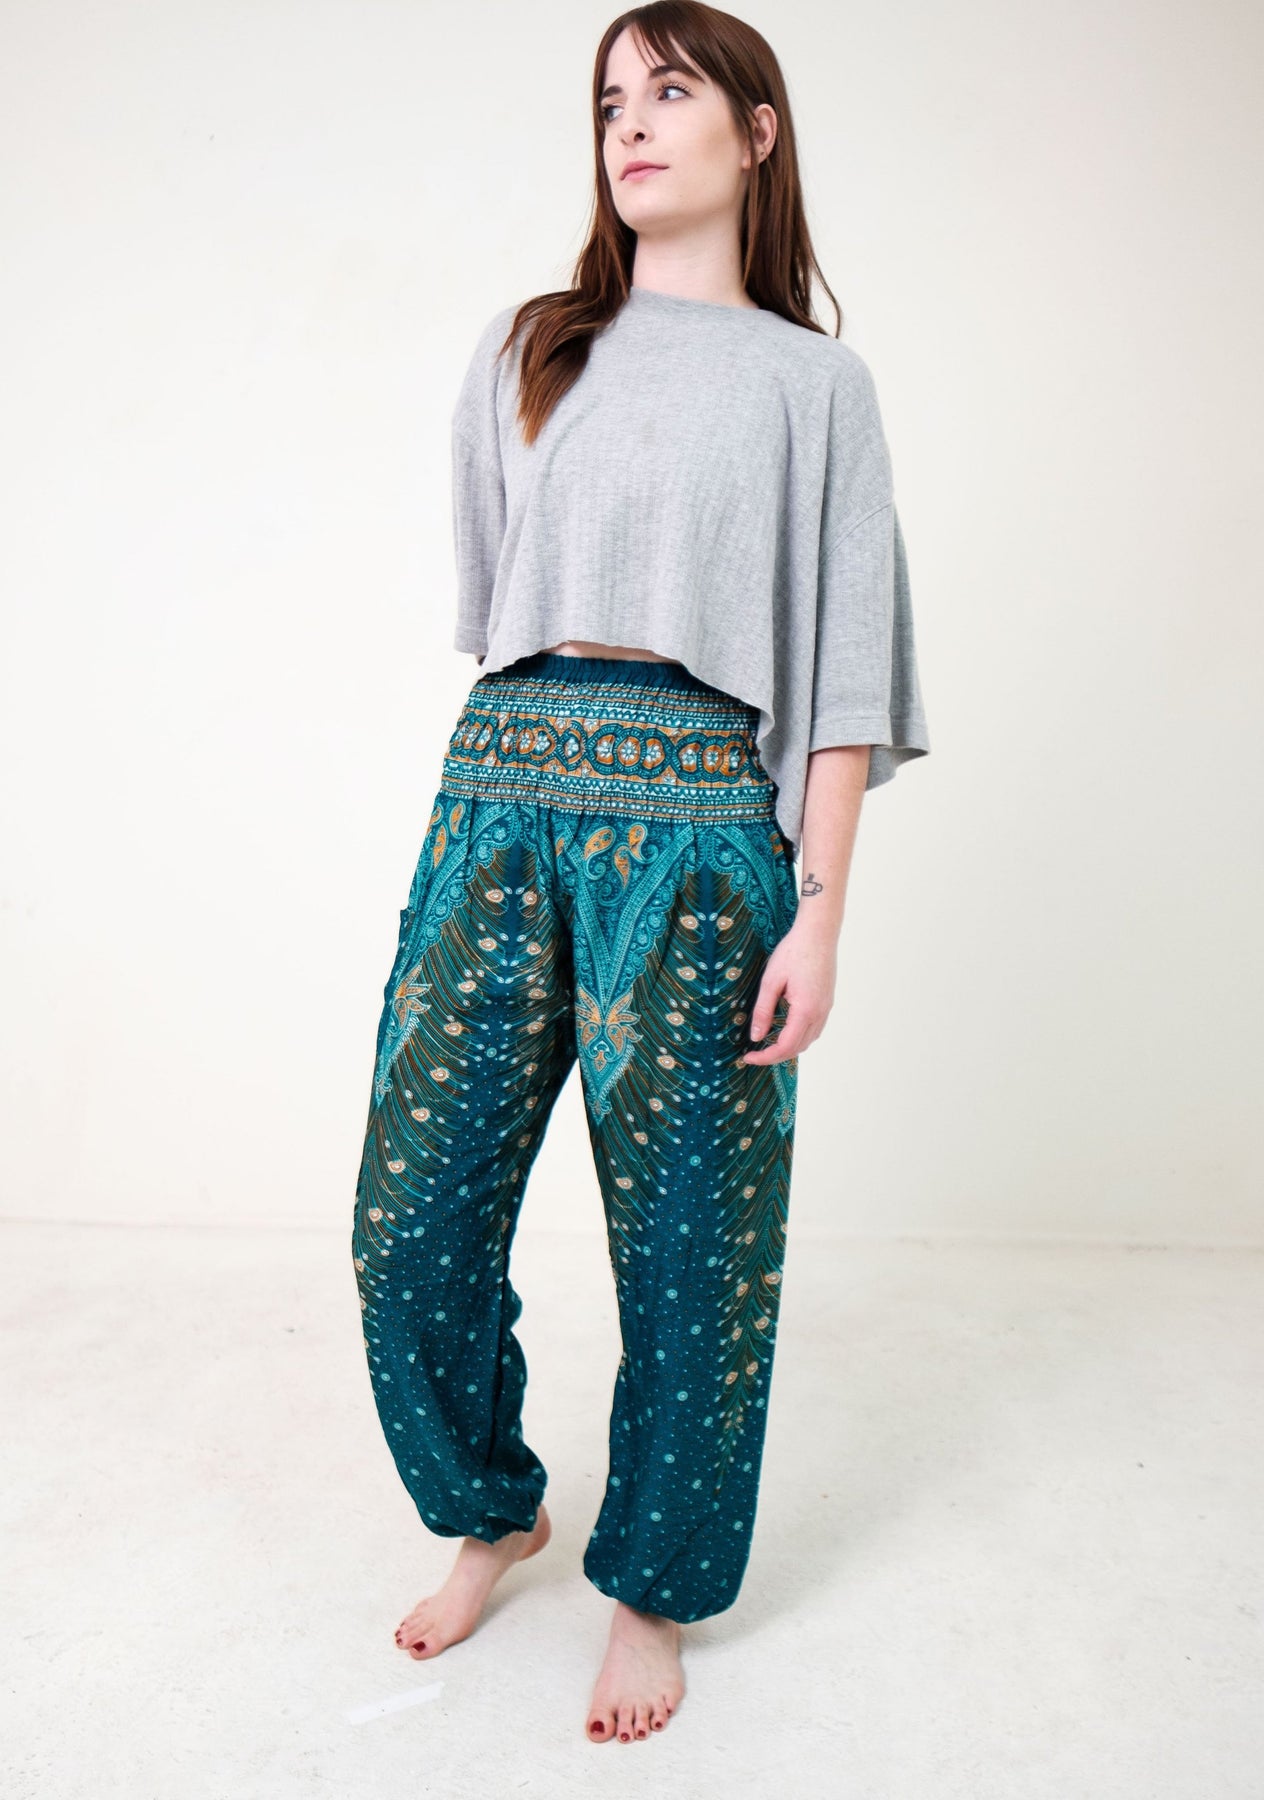 PEACOCK PALAZZO PANTS Women Red Small to Large Plus Sizes Hippie